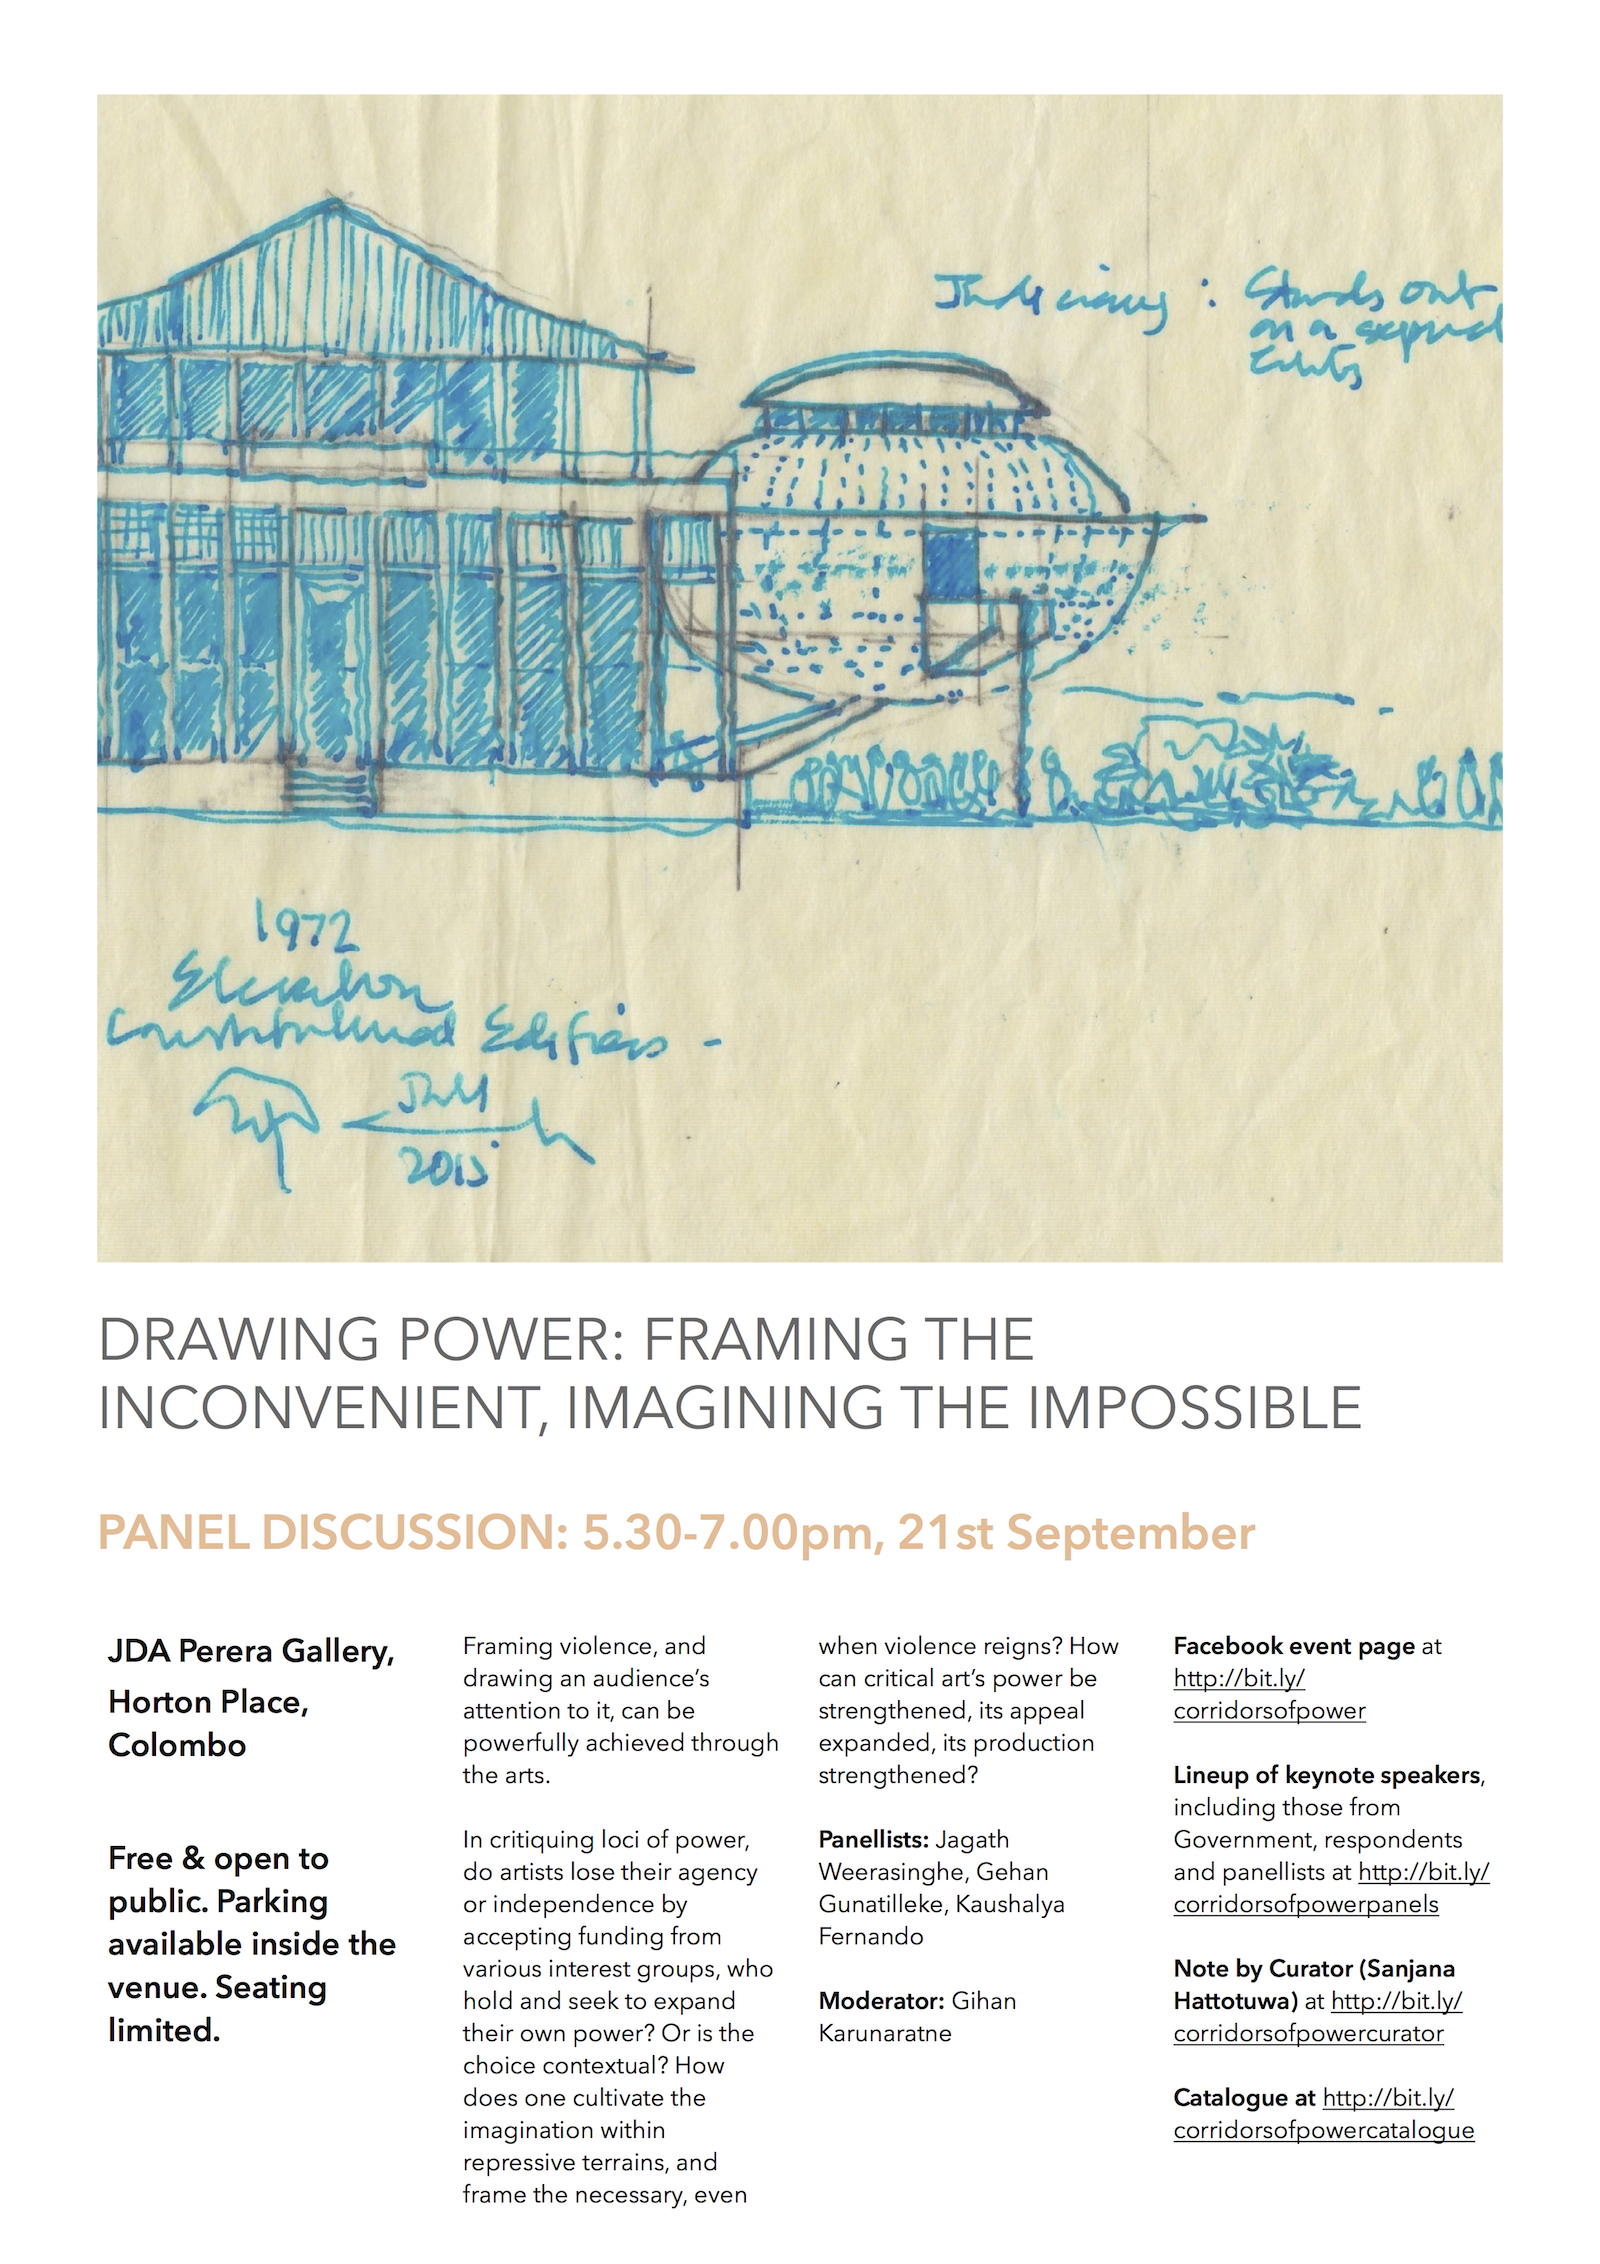 Drawing power- Framing the inconvenient, imagining the impossible